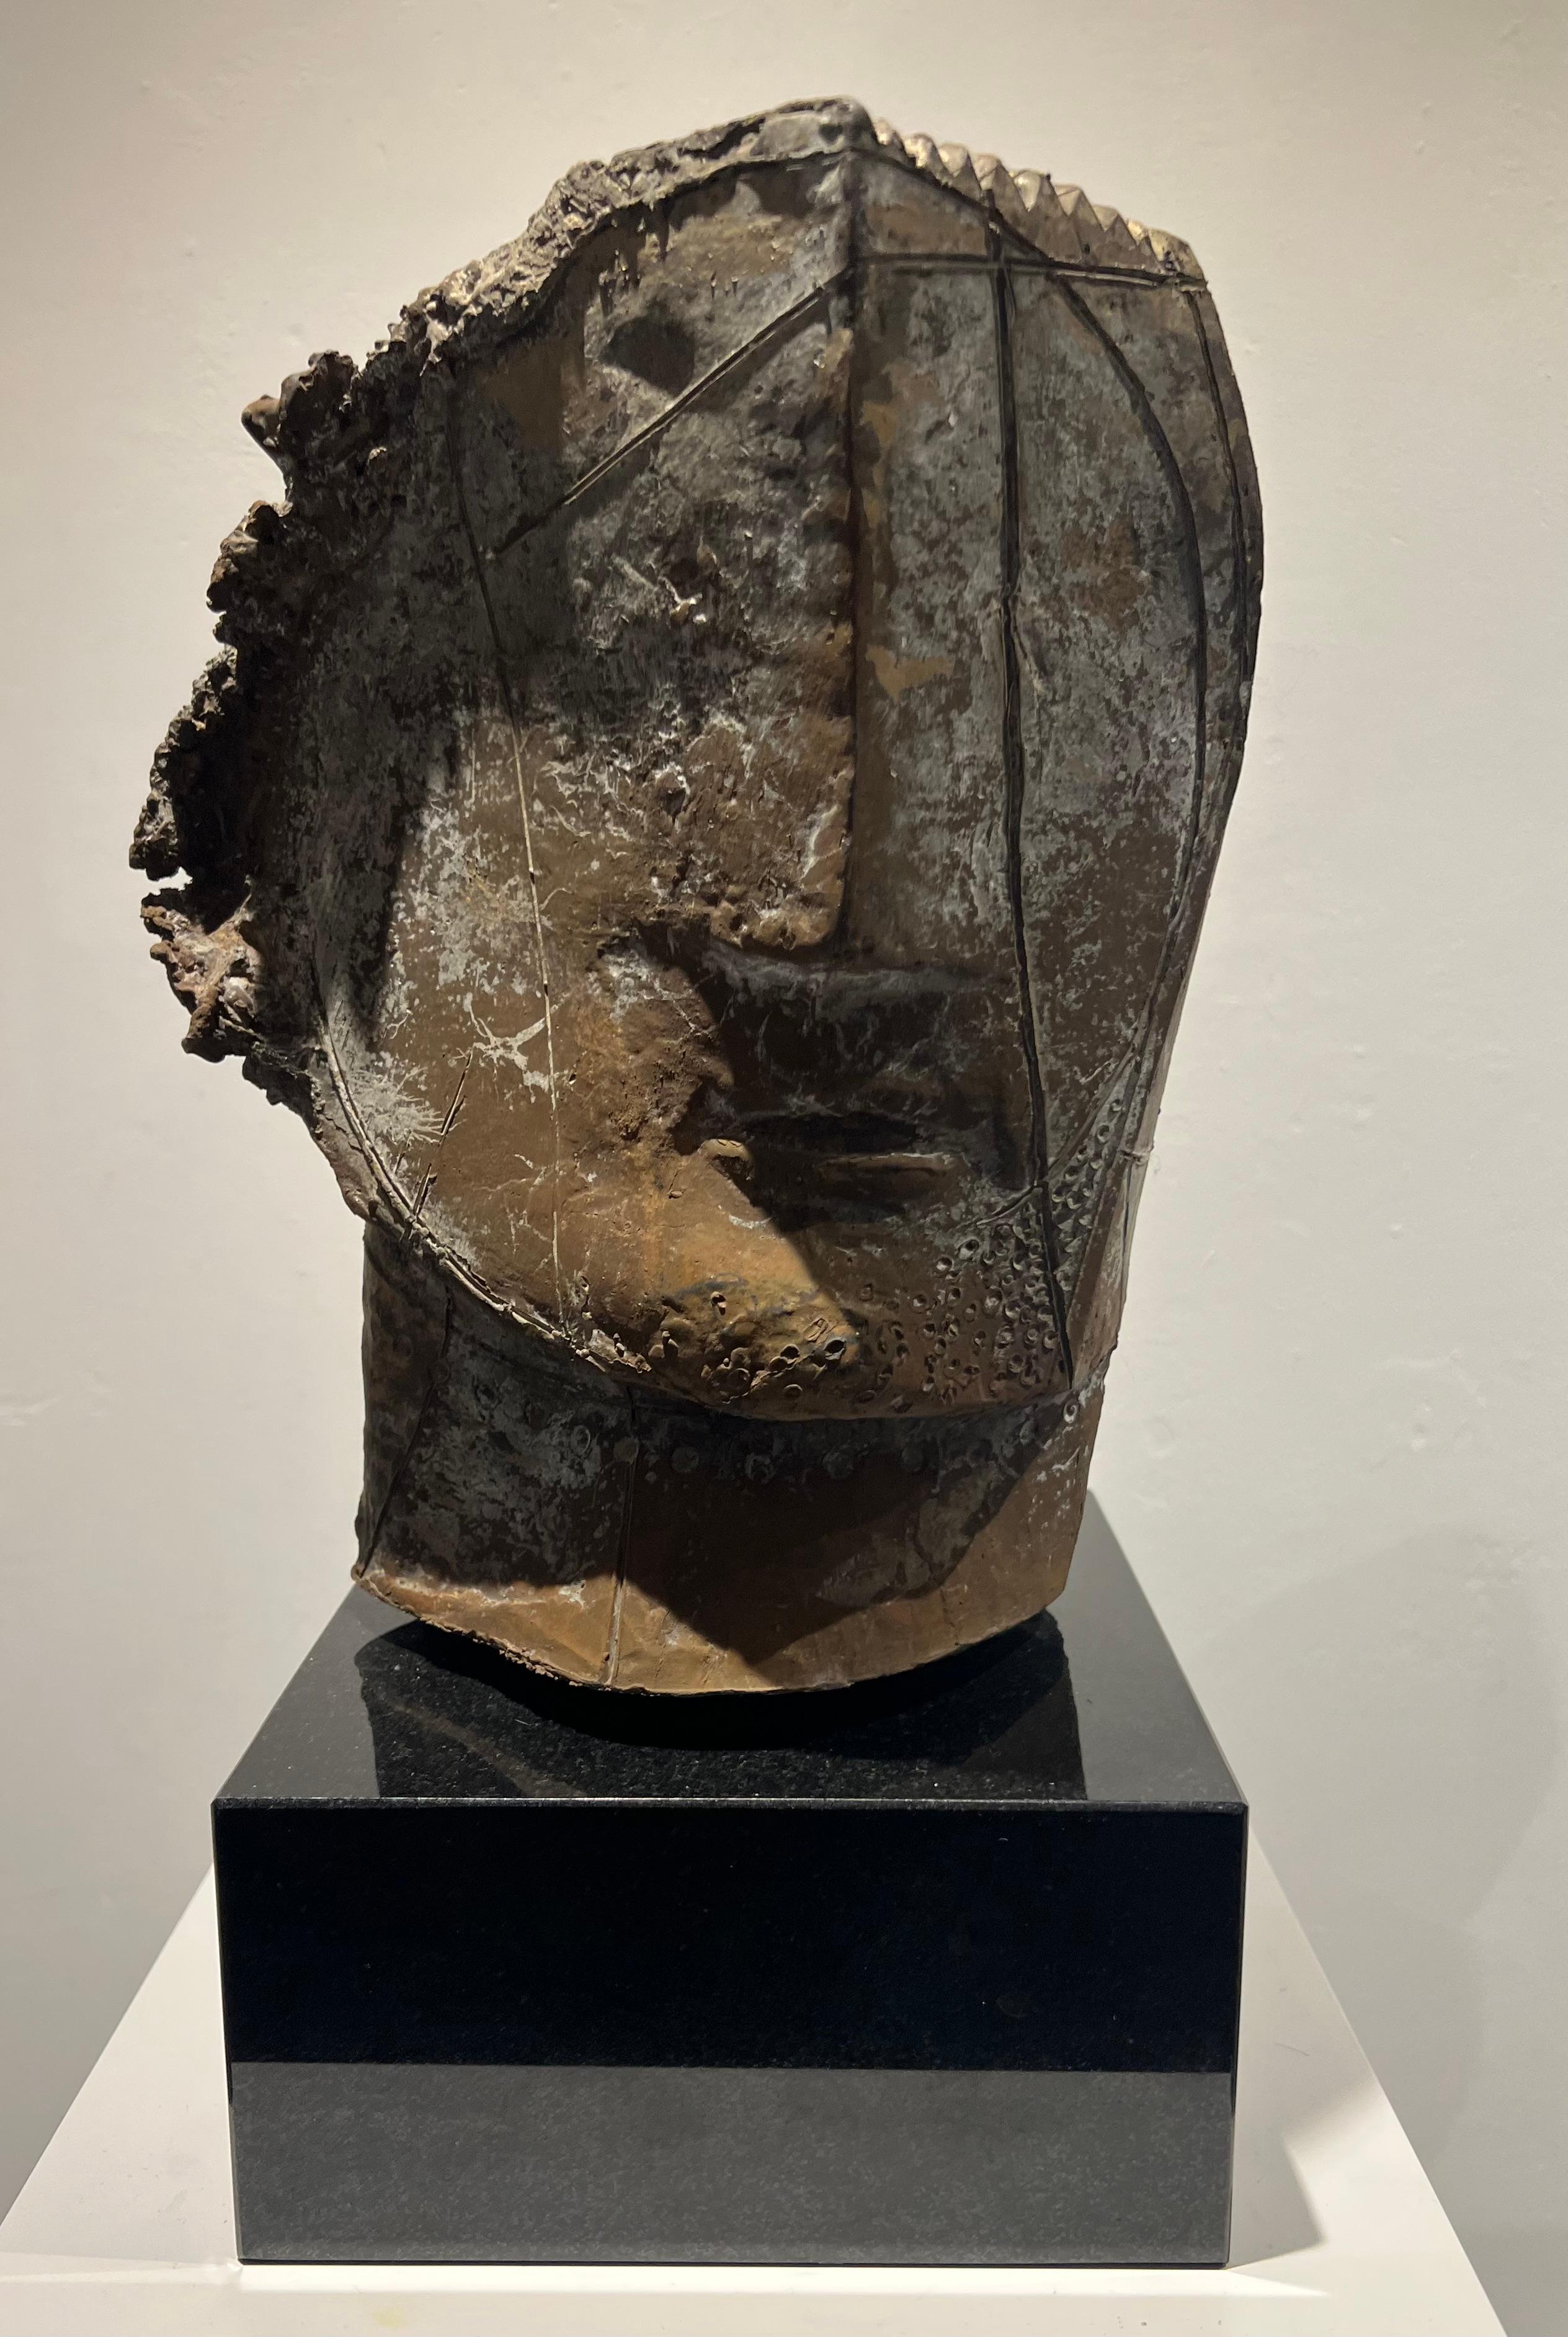 Inner Circle (Casting Scale) Bronze Sculpture Figurative Abstract Head In Stock

Junghans (1956, Recklinghausen) creates abstract sculptures in stone, wood and bronze, mostly torsos and primal portraits, in a primitive, cubic and expressionistic